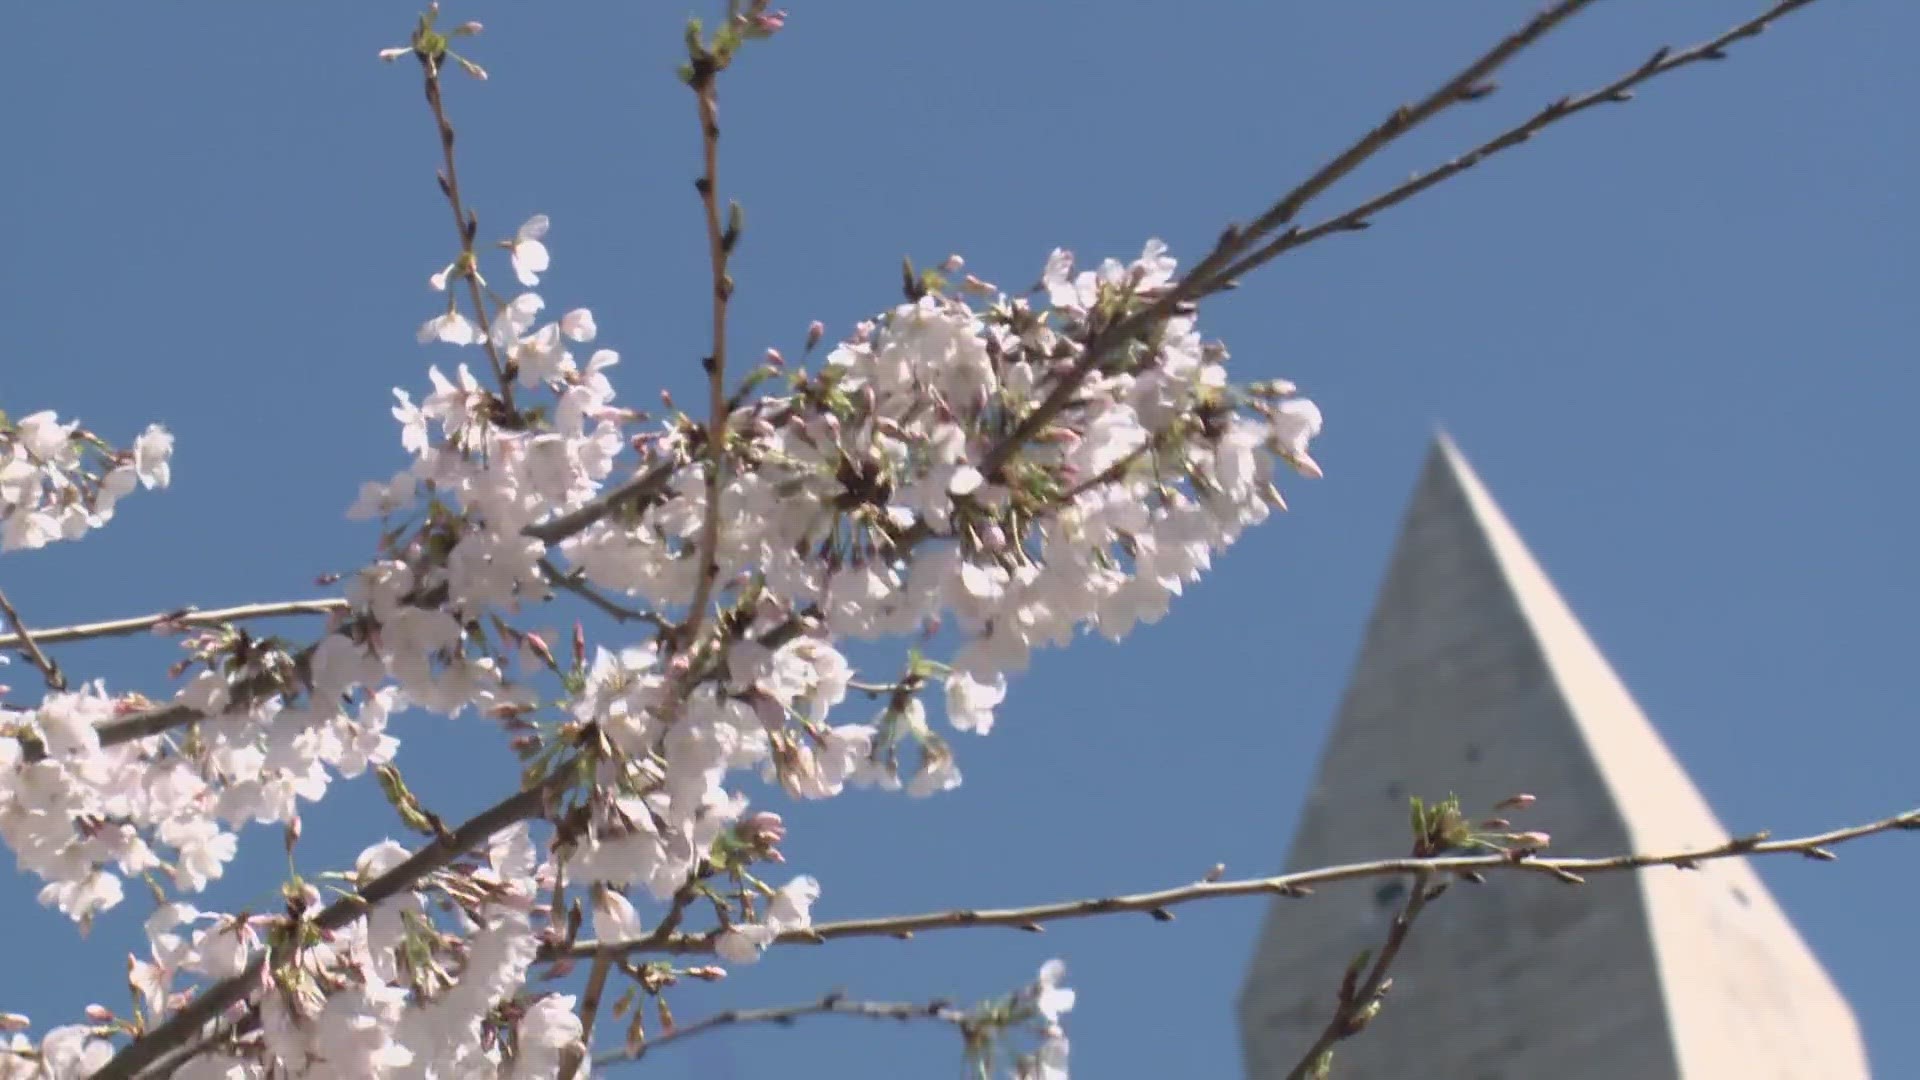 It's still too early for cherry blossoms, a spokesperson for the National Park Service said.